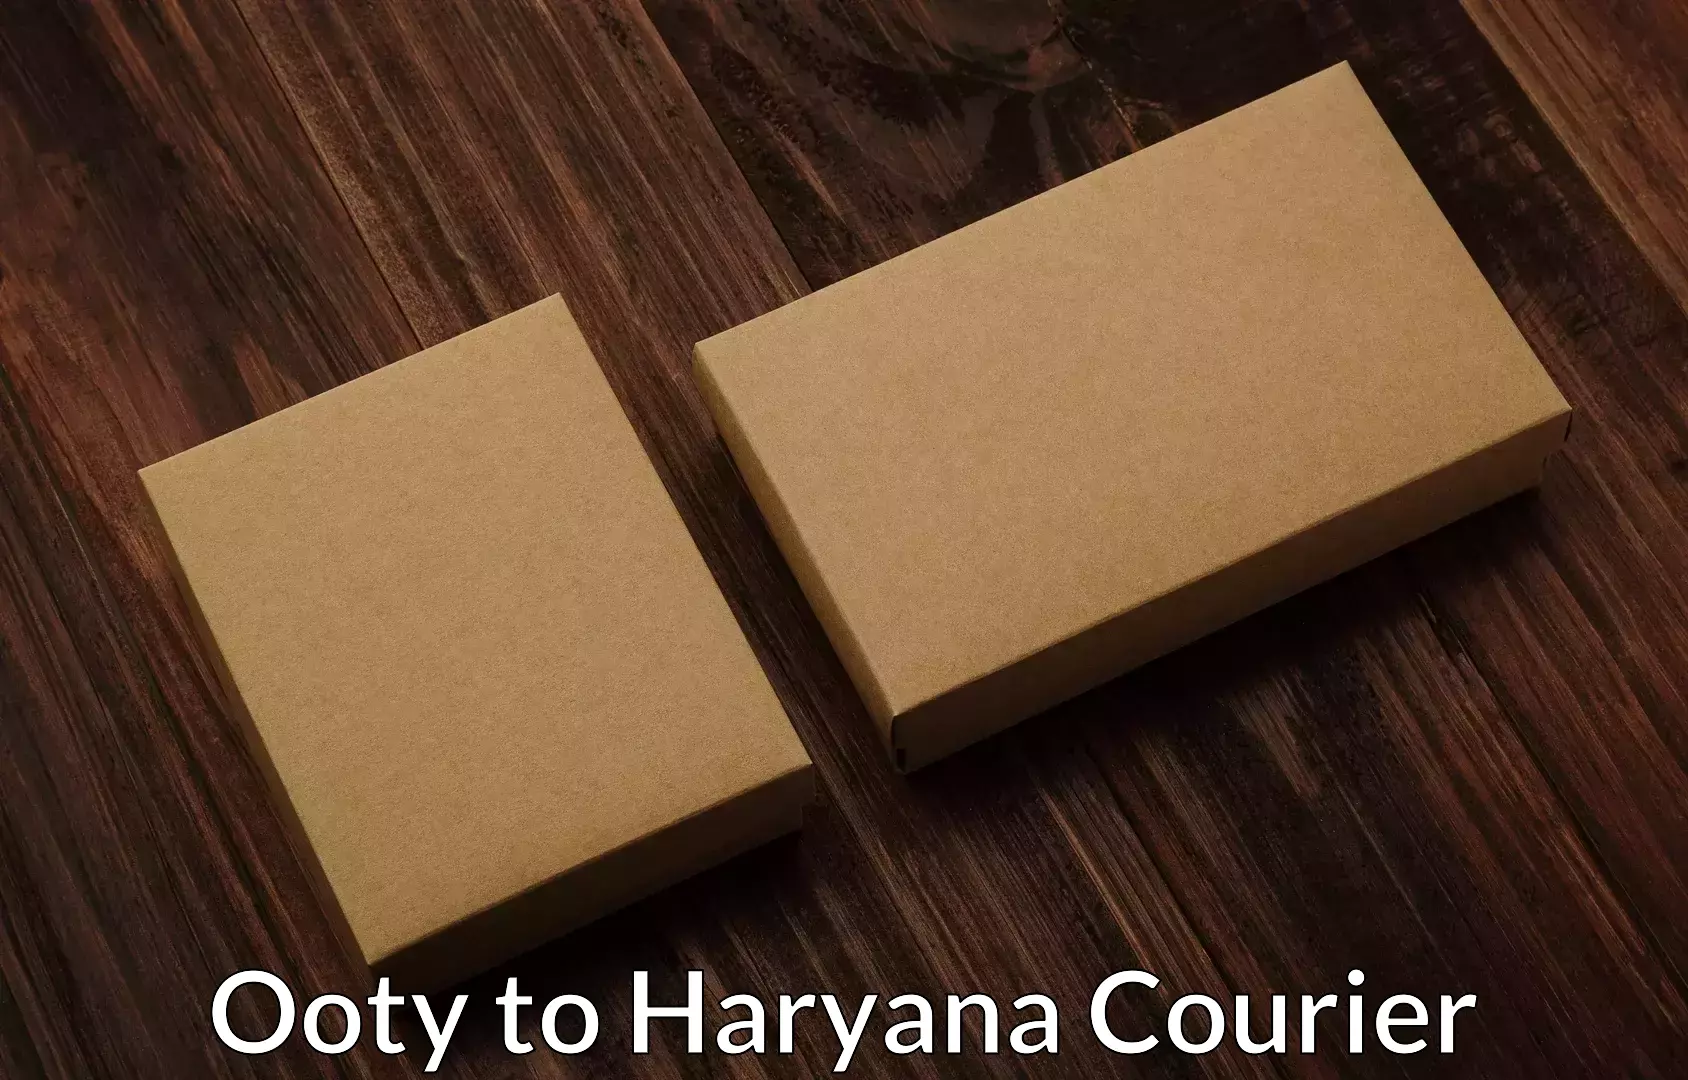 Furniture delivery service Ooty to Gurgaon